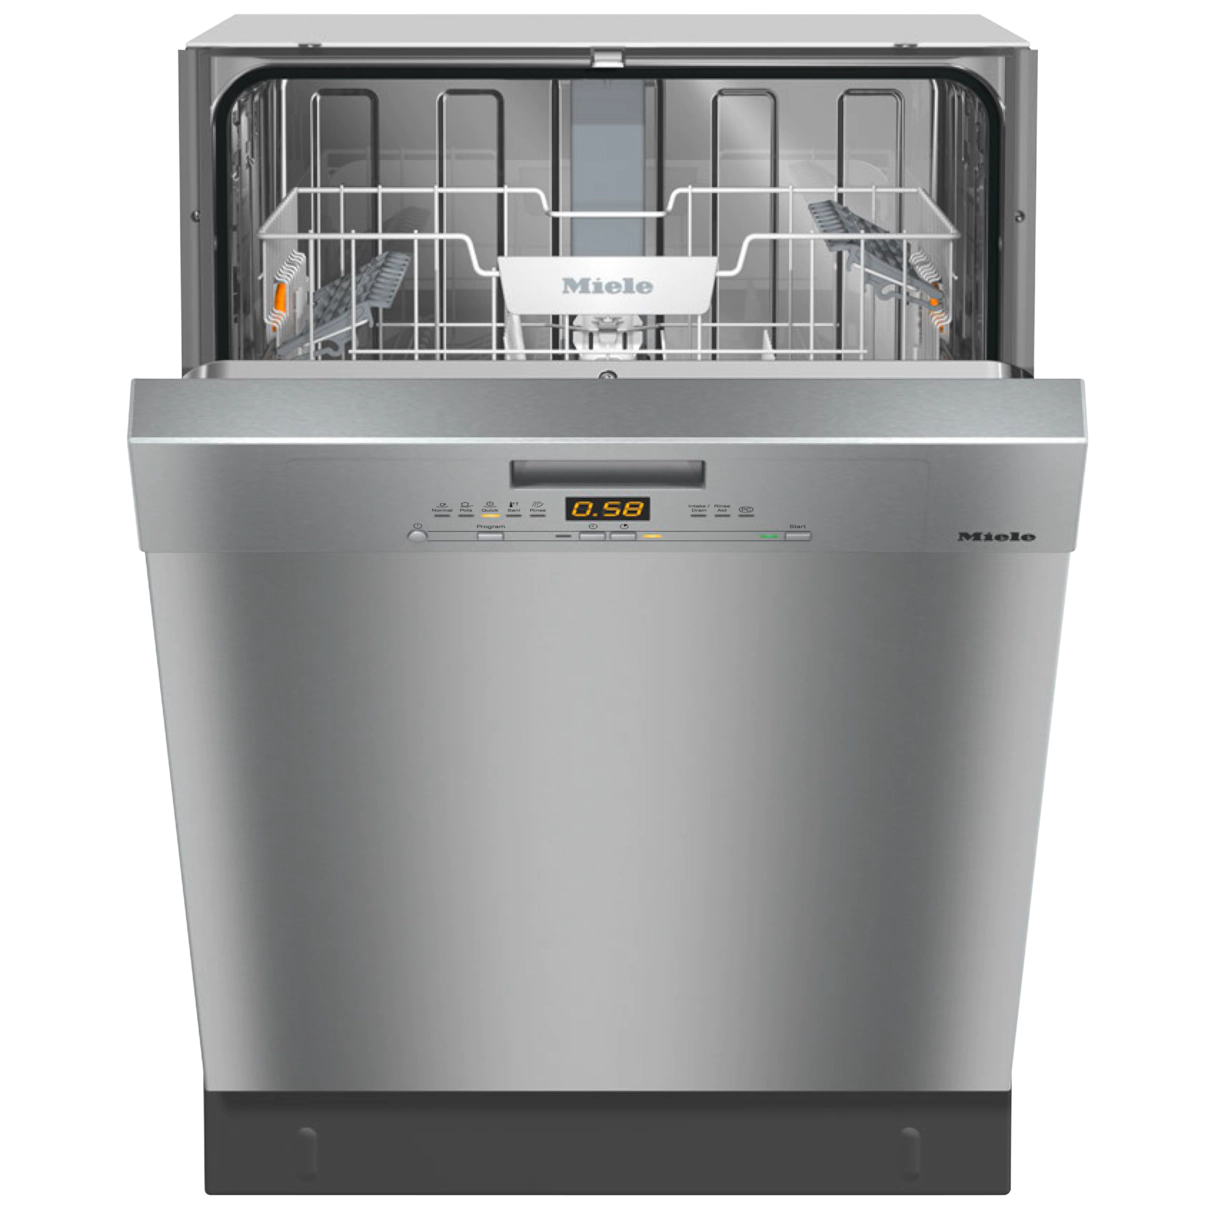 Miele G7000 dishwasher review: Miele's newest dishwasher uses a